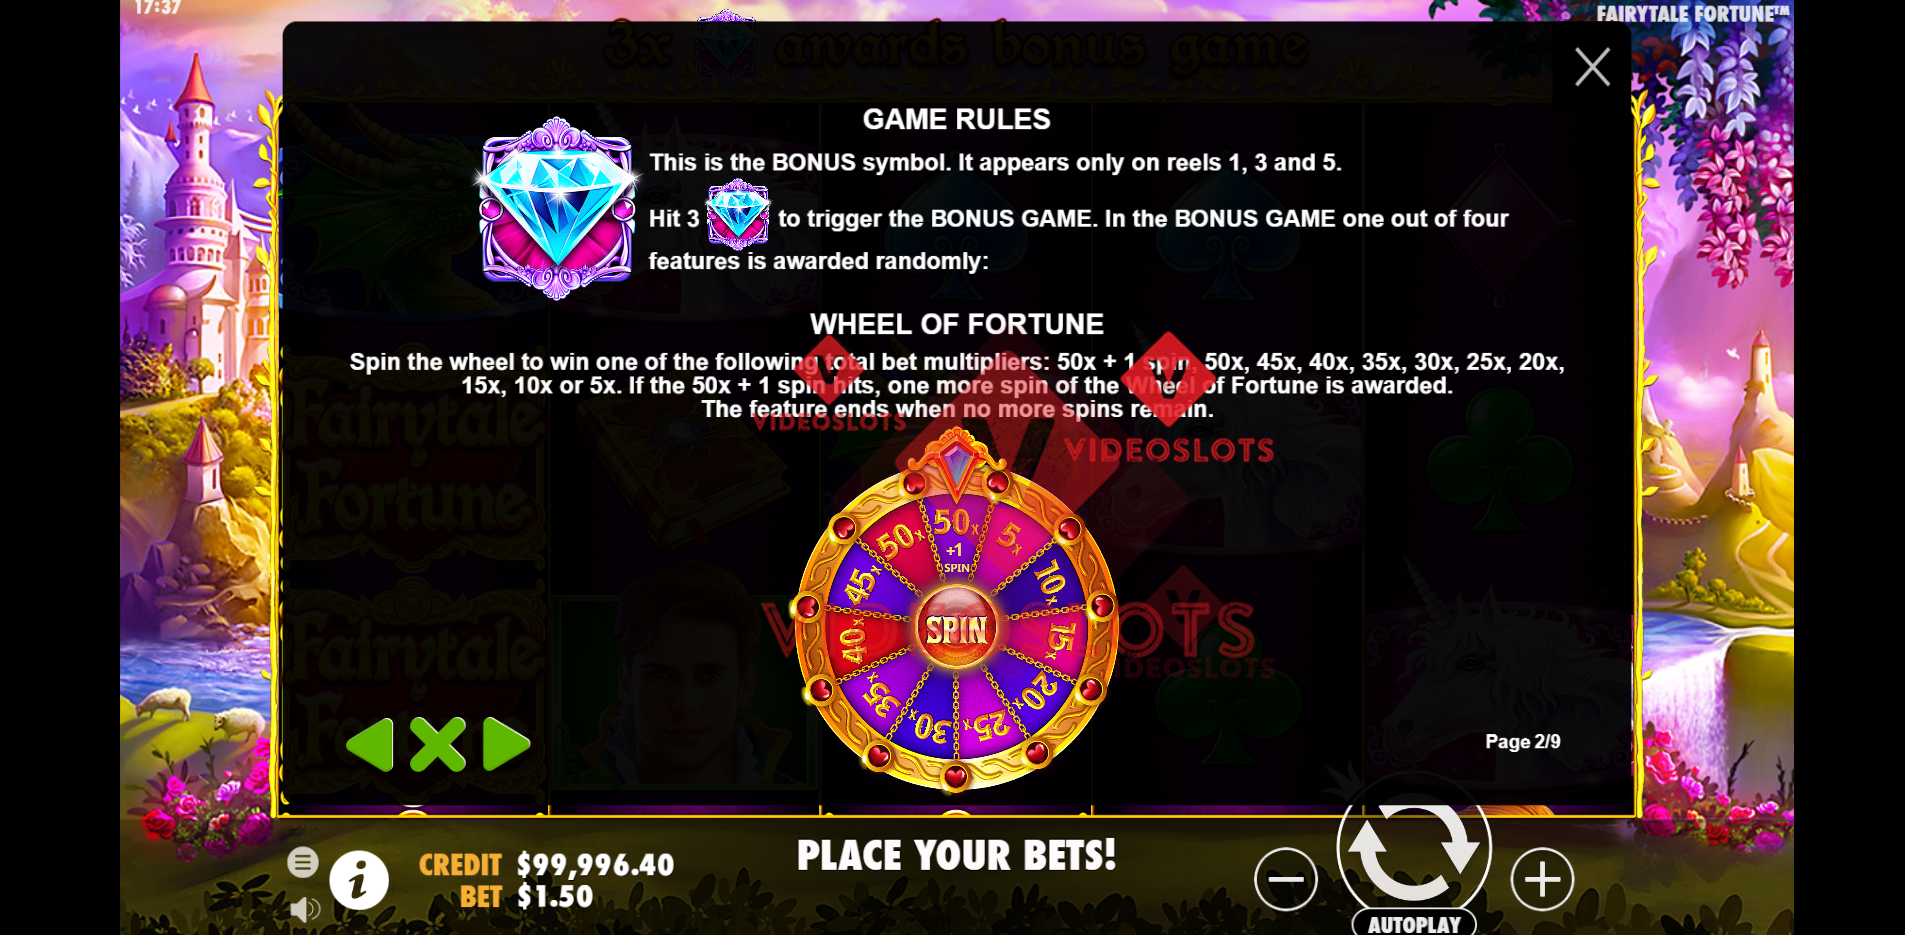 Game Rules for Fairytale Fortune slot by Pragmatic Play